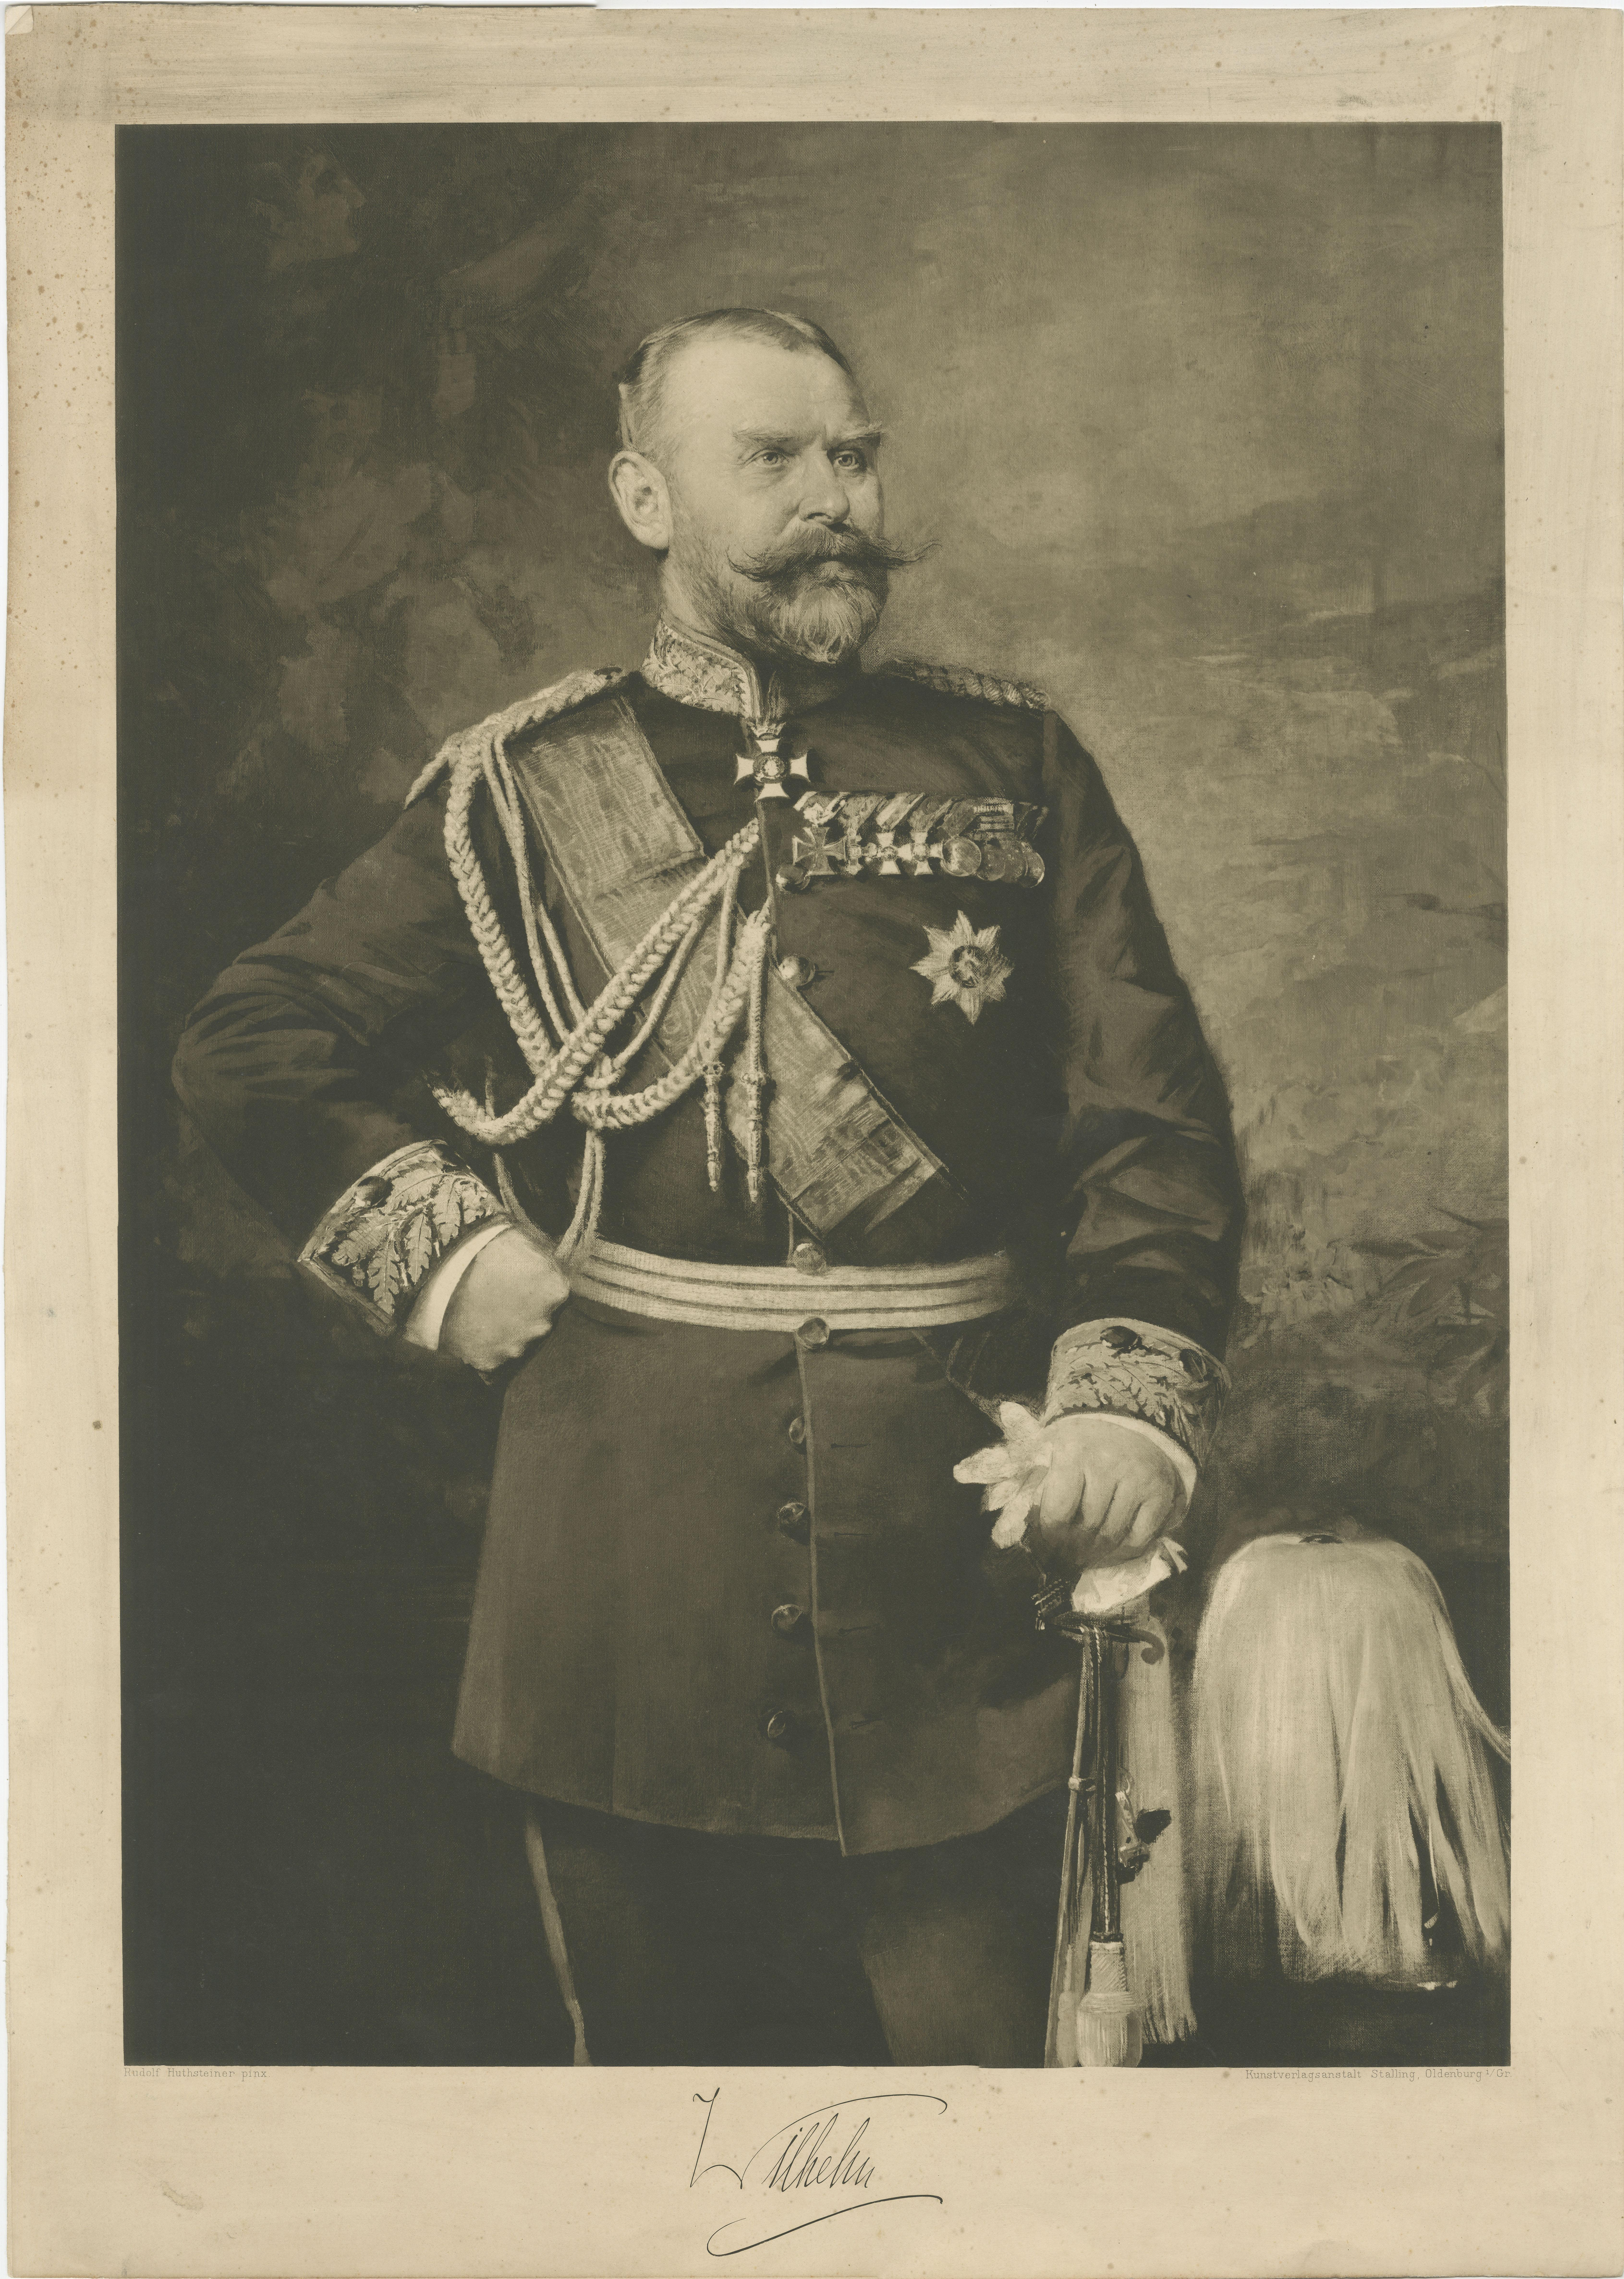 Large lithograph on chine collé of William II of Württemberg. William II was the last King of Württemberg. He ruled from 6 October 1891 until the dissolution of the kingdom on 30 November 1918. He was the last German ruler to abdicate in the wake of